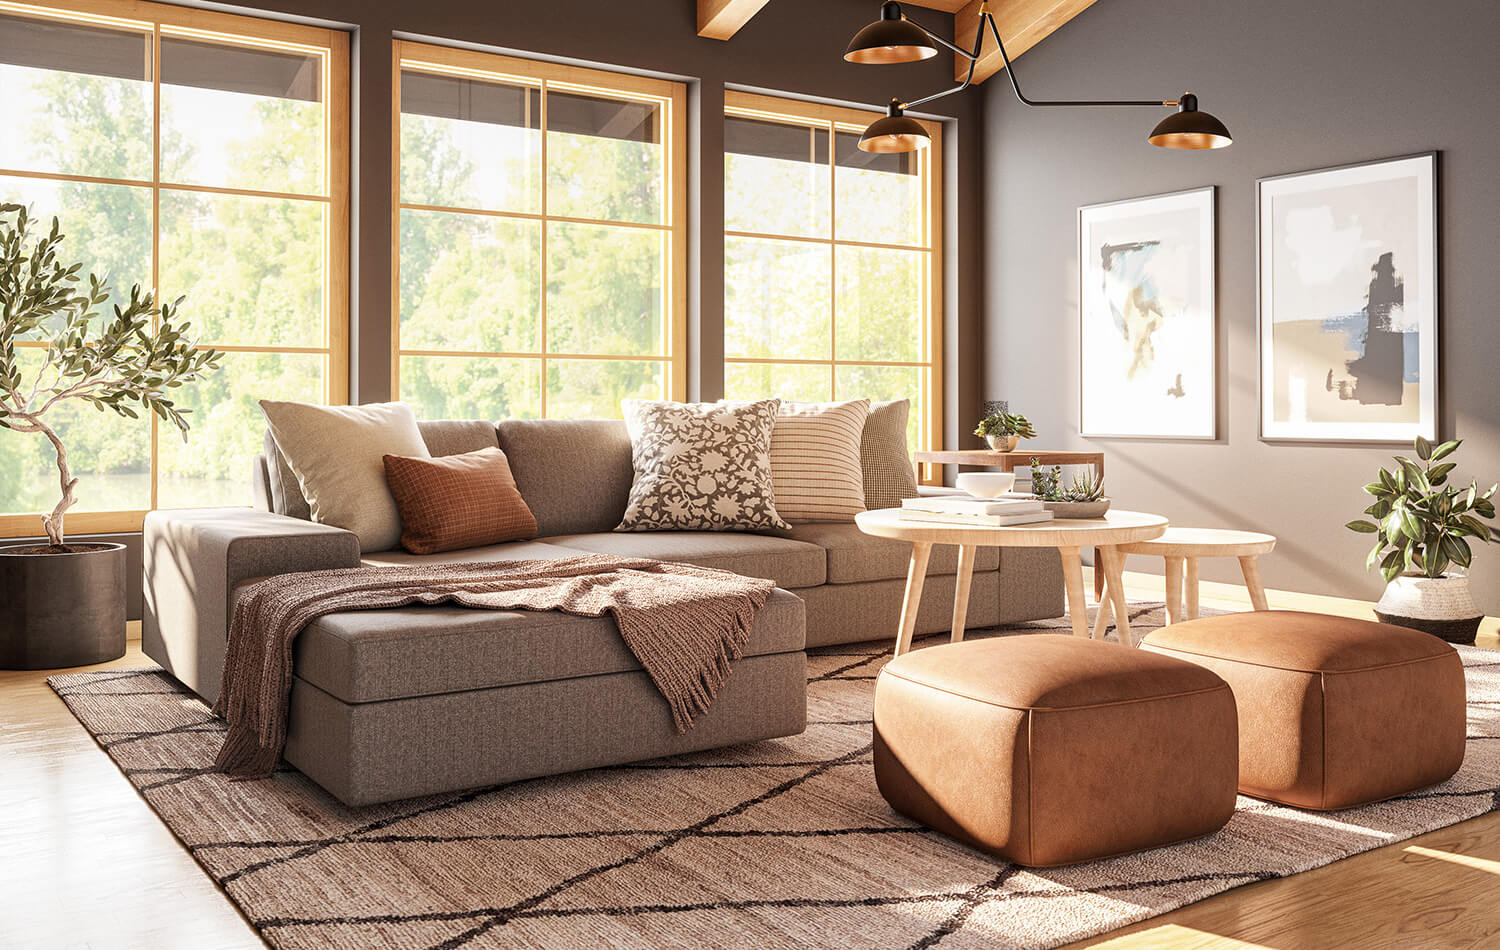 IRL: Voya Coffee & Side Tables nested with the Mayer Poufs in Sundance Marigold leather, Blumen Chaise Left Sectional in Melton Feather fabric